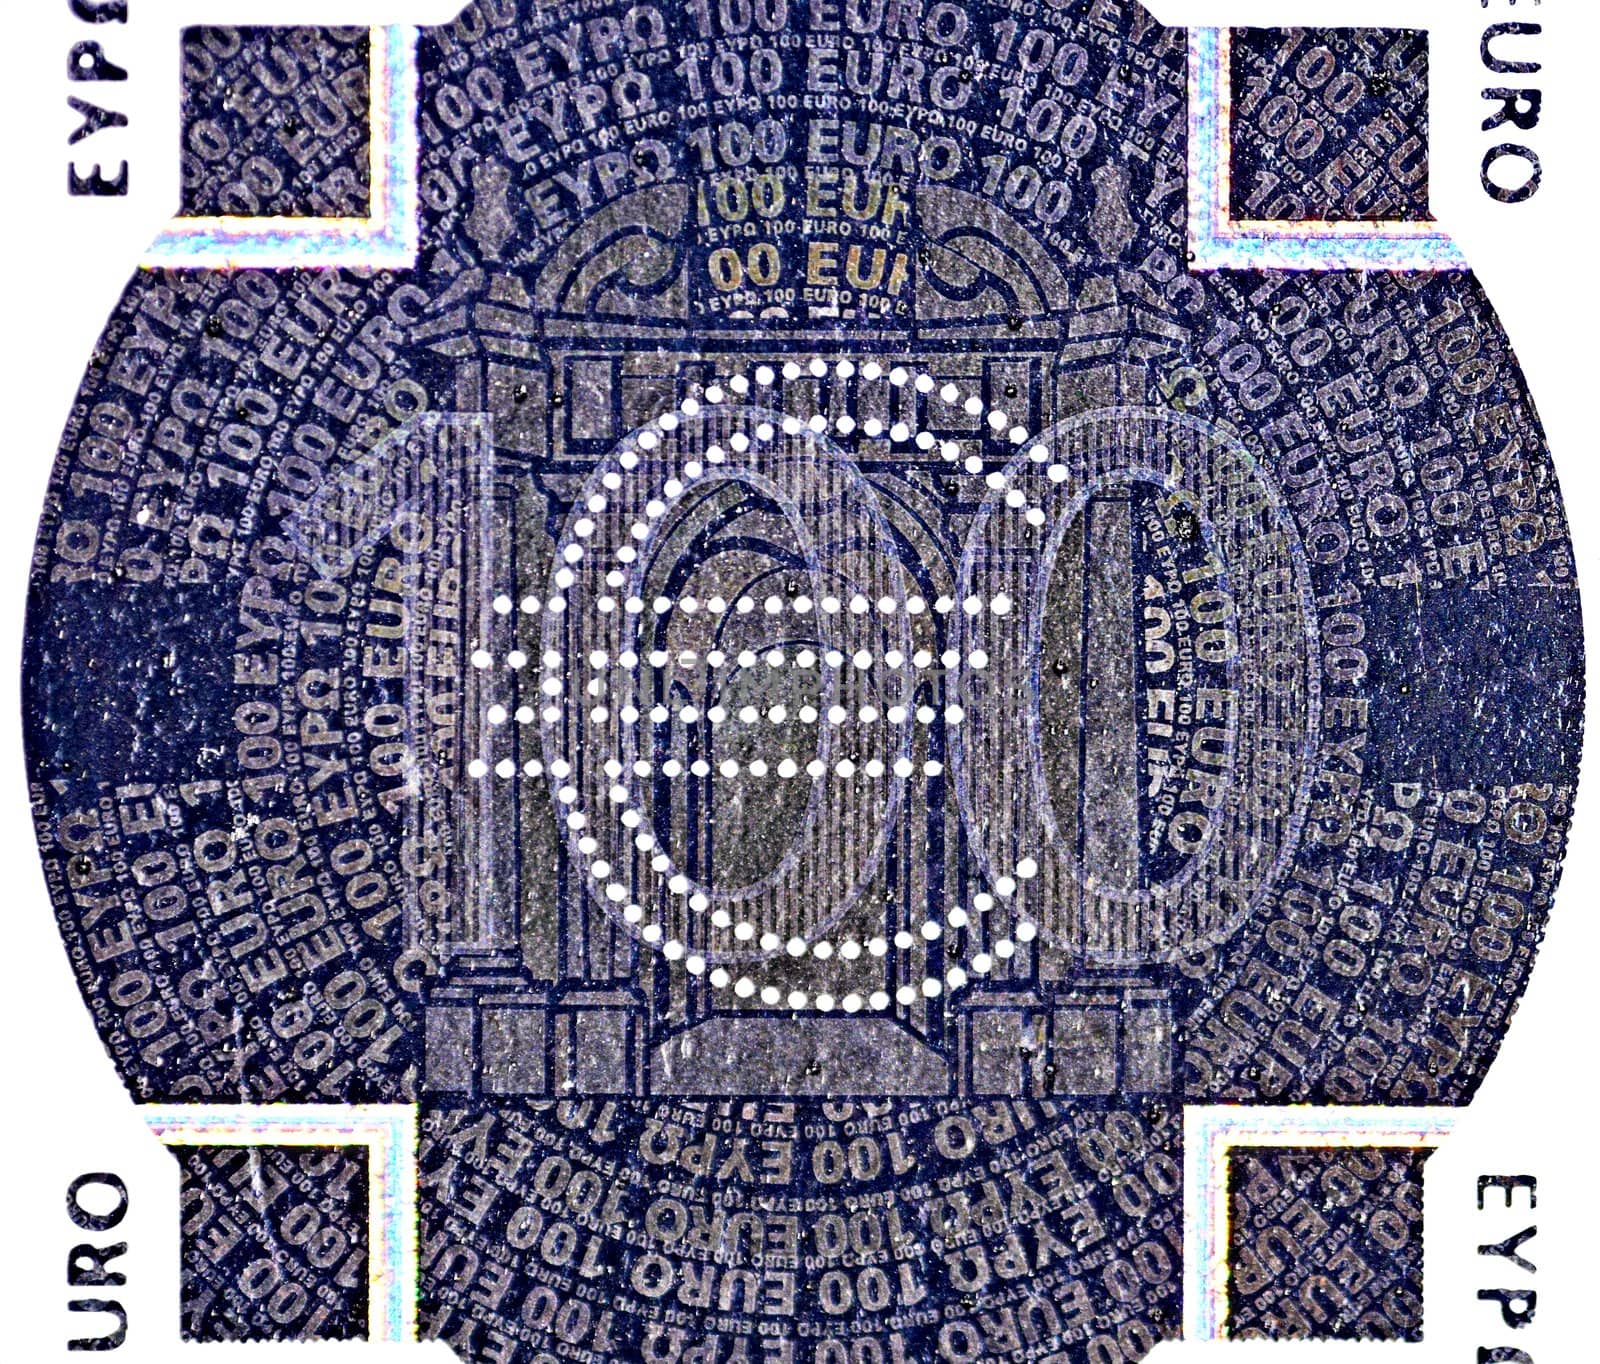 hologram on the one hundred Euro banknote